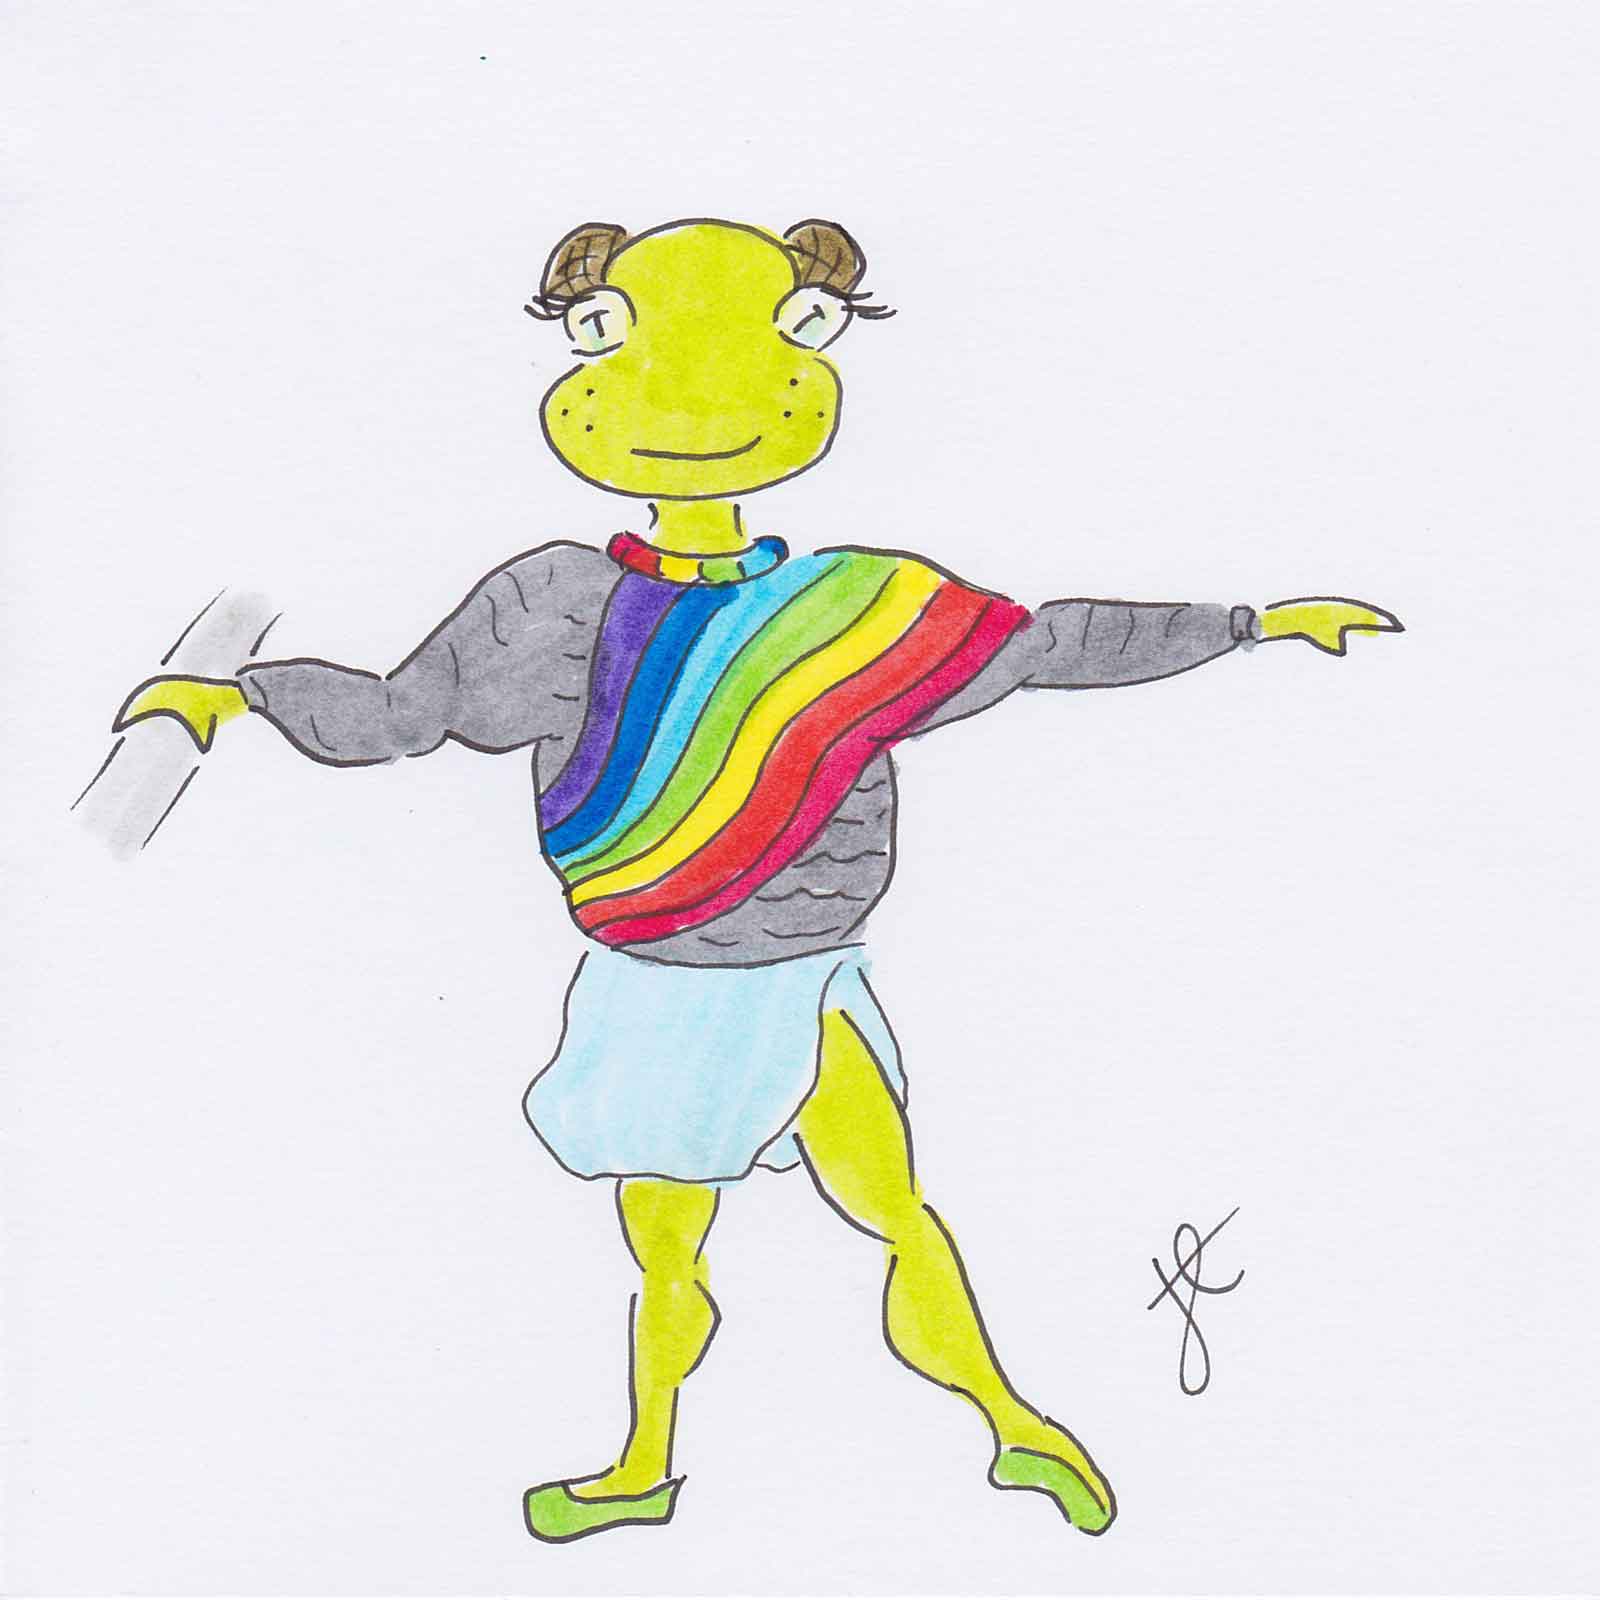 Ballettoons Lily illustration of dancing frog poised at the barre in ballet skirt and rainbow jumper